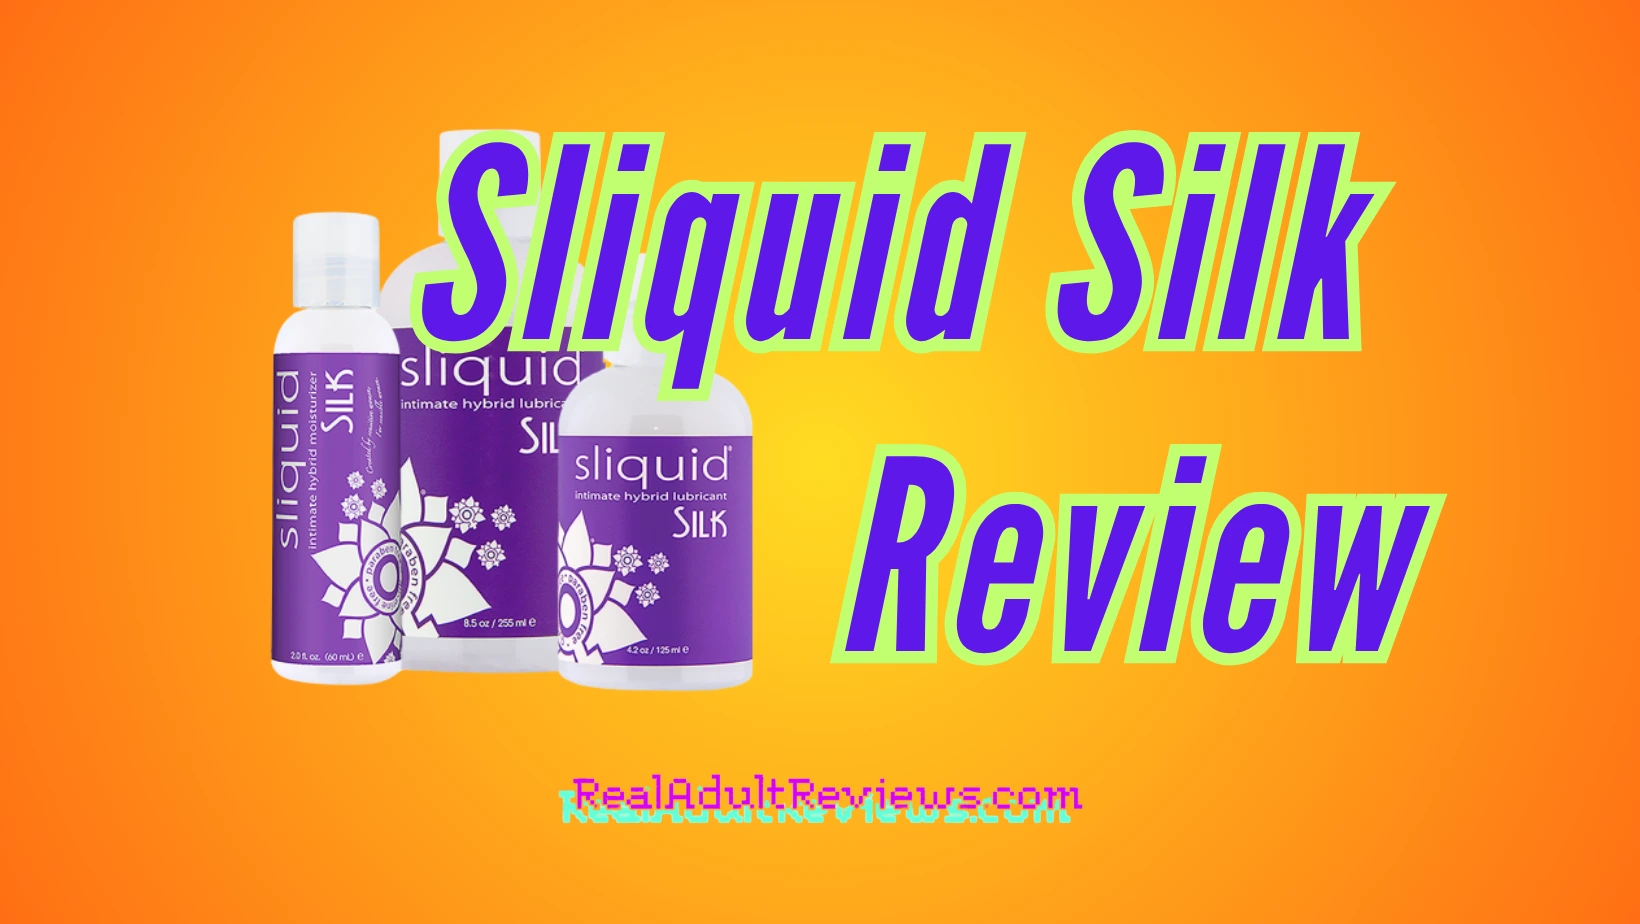 How to Earn the Name Cum Lube? Hybrid Silk Sliquid Review